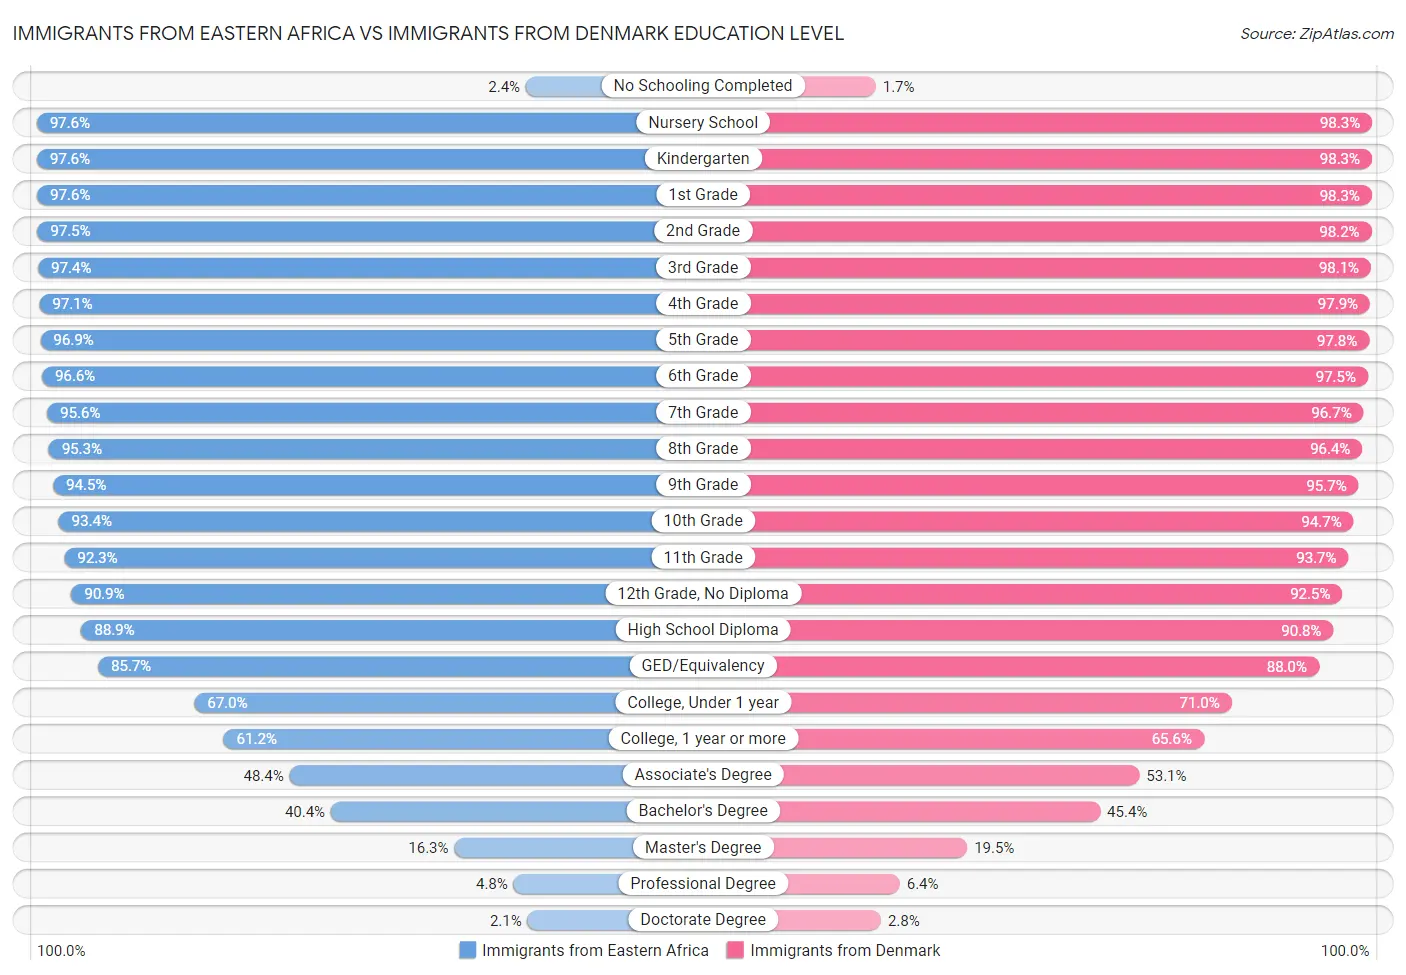 Immigrants from Eastern Africa vs Immigrants from Denmark Education Level